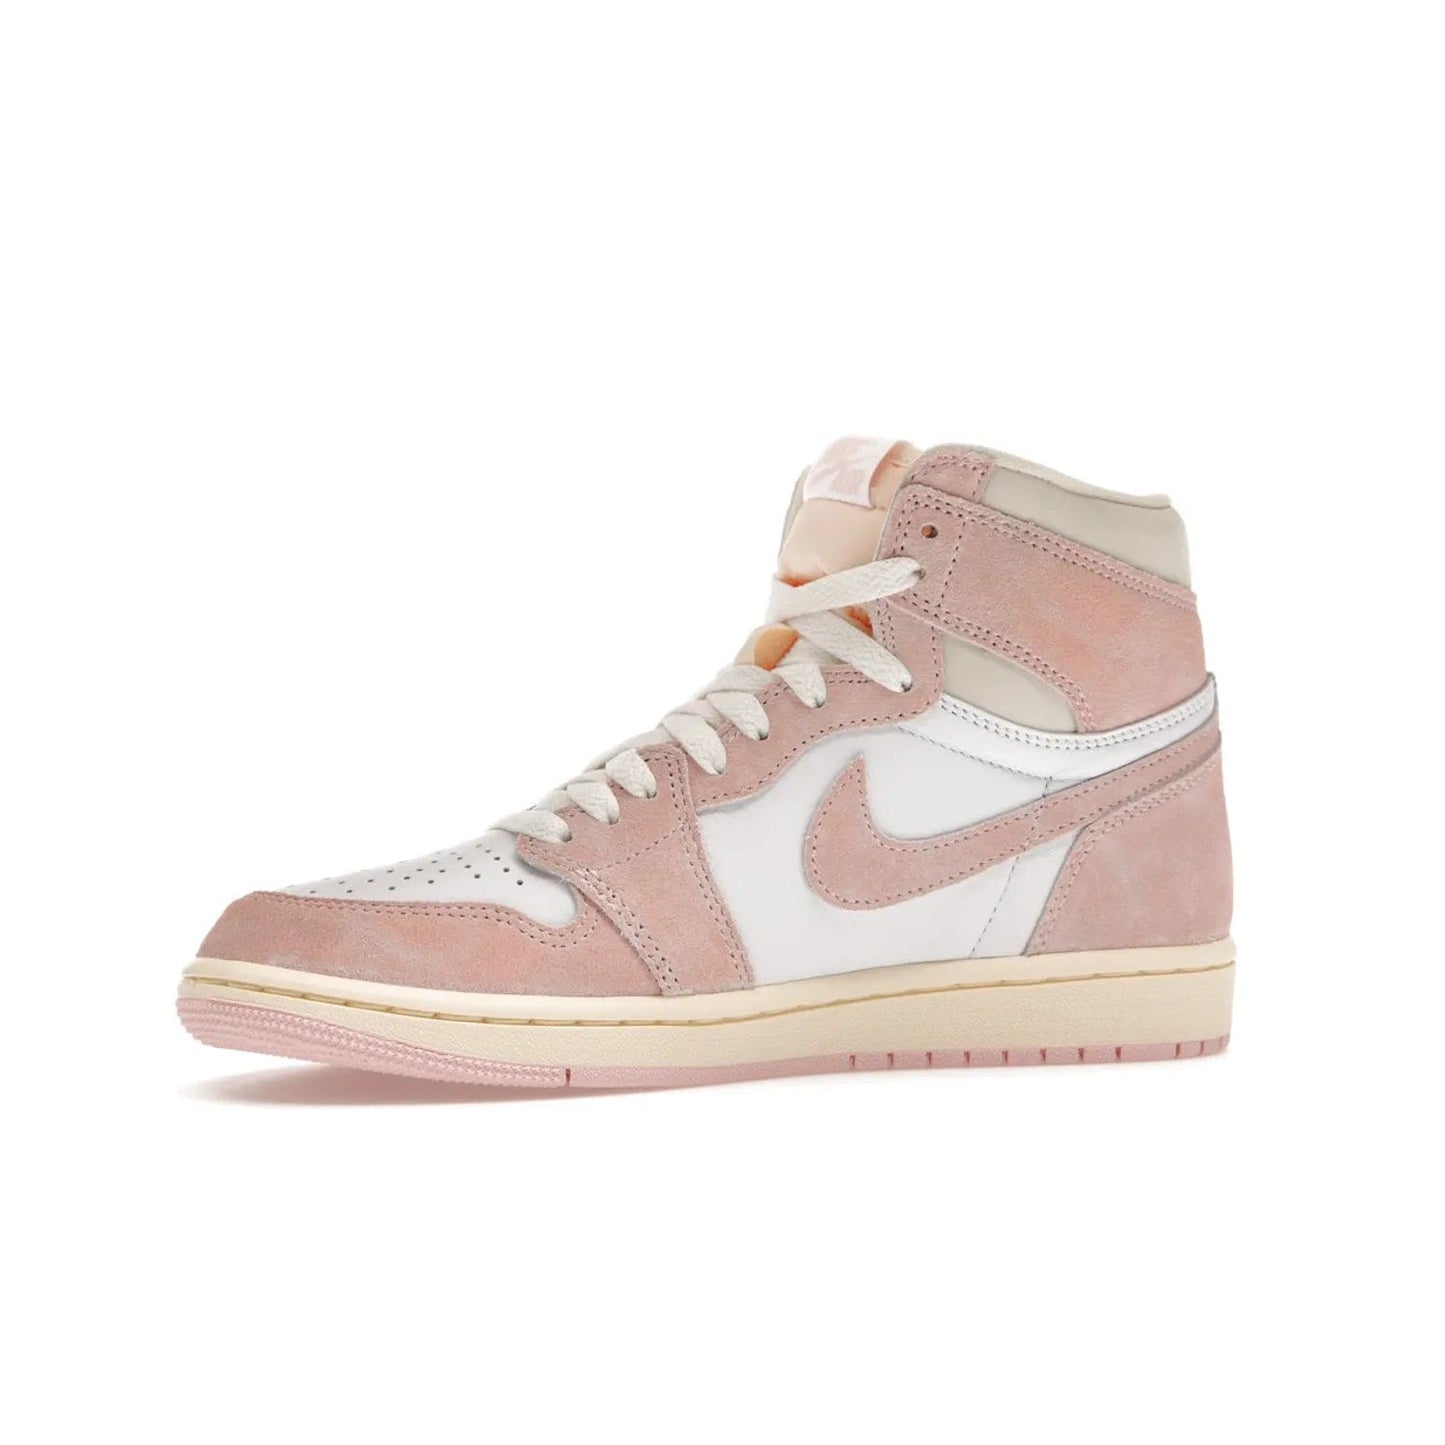 Jordan 1 Retro High OG Washed Pink (Women's) - Image 17 - Only at www.BallersClubKickz.com - Iconic Air Jordan 1 Retro High OG for women with unique pink suede and white leather uppers. Get the timeless look on April 22, 2023.